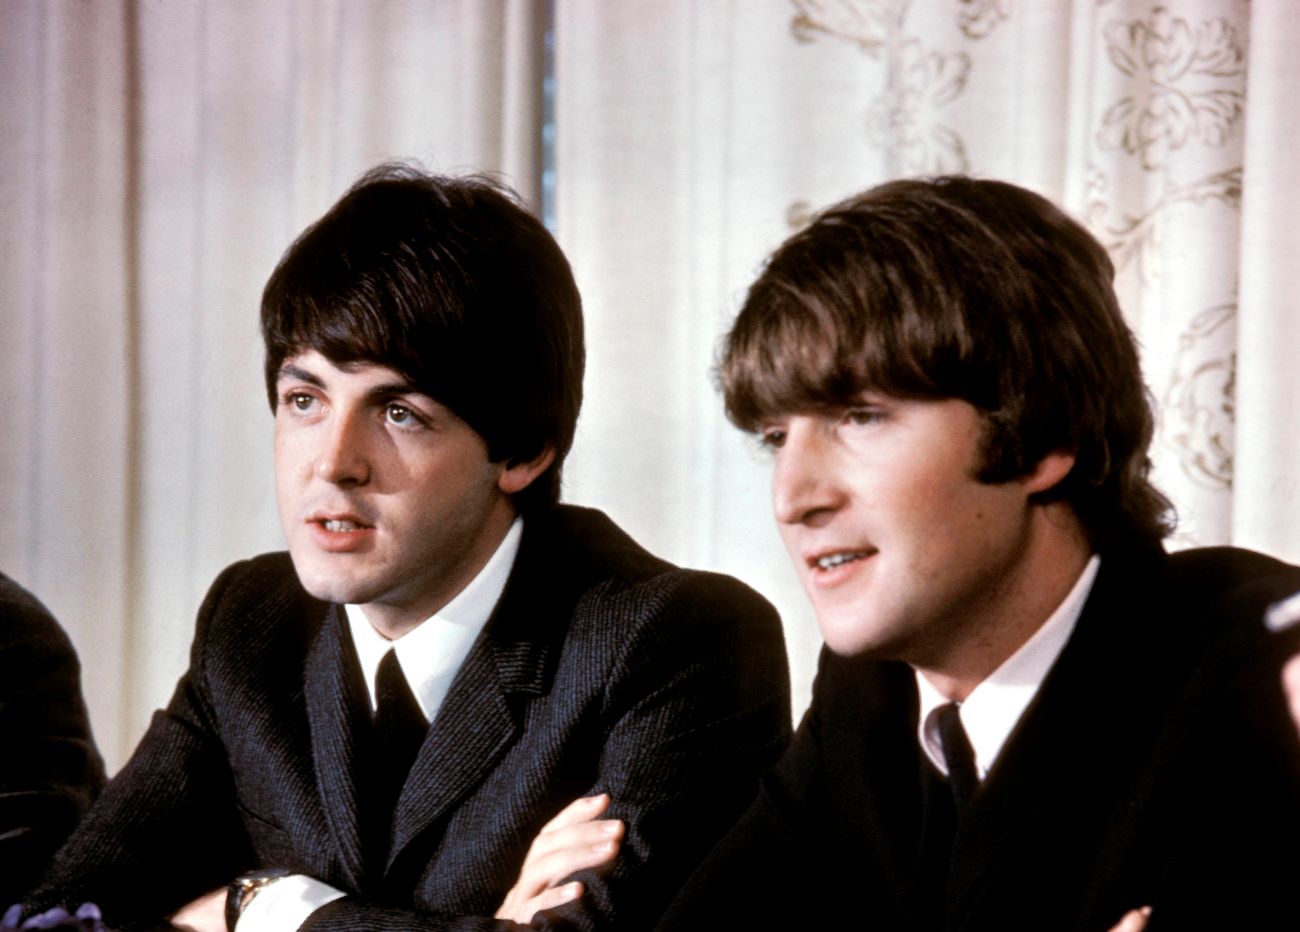 Paul McCartney and John Lennon wear suits and sit next to each other.